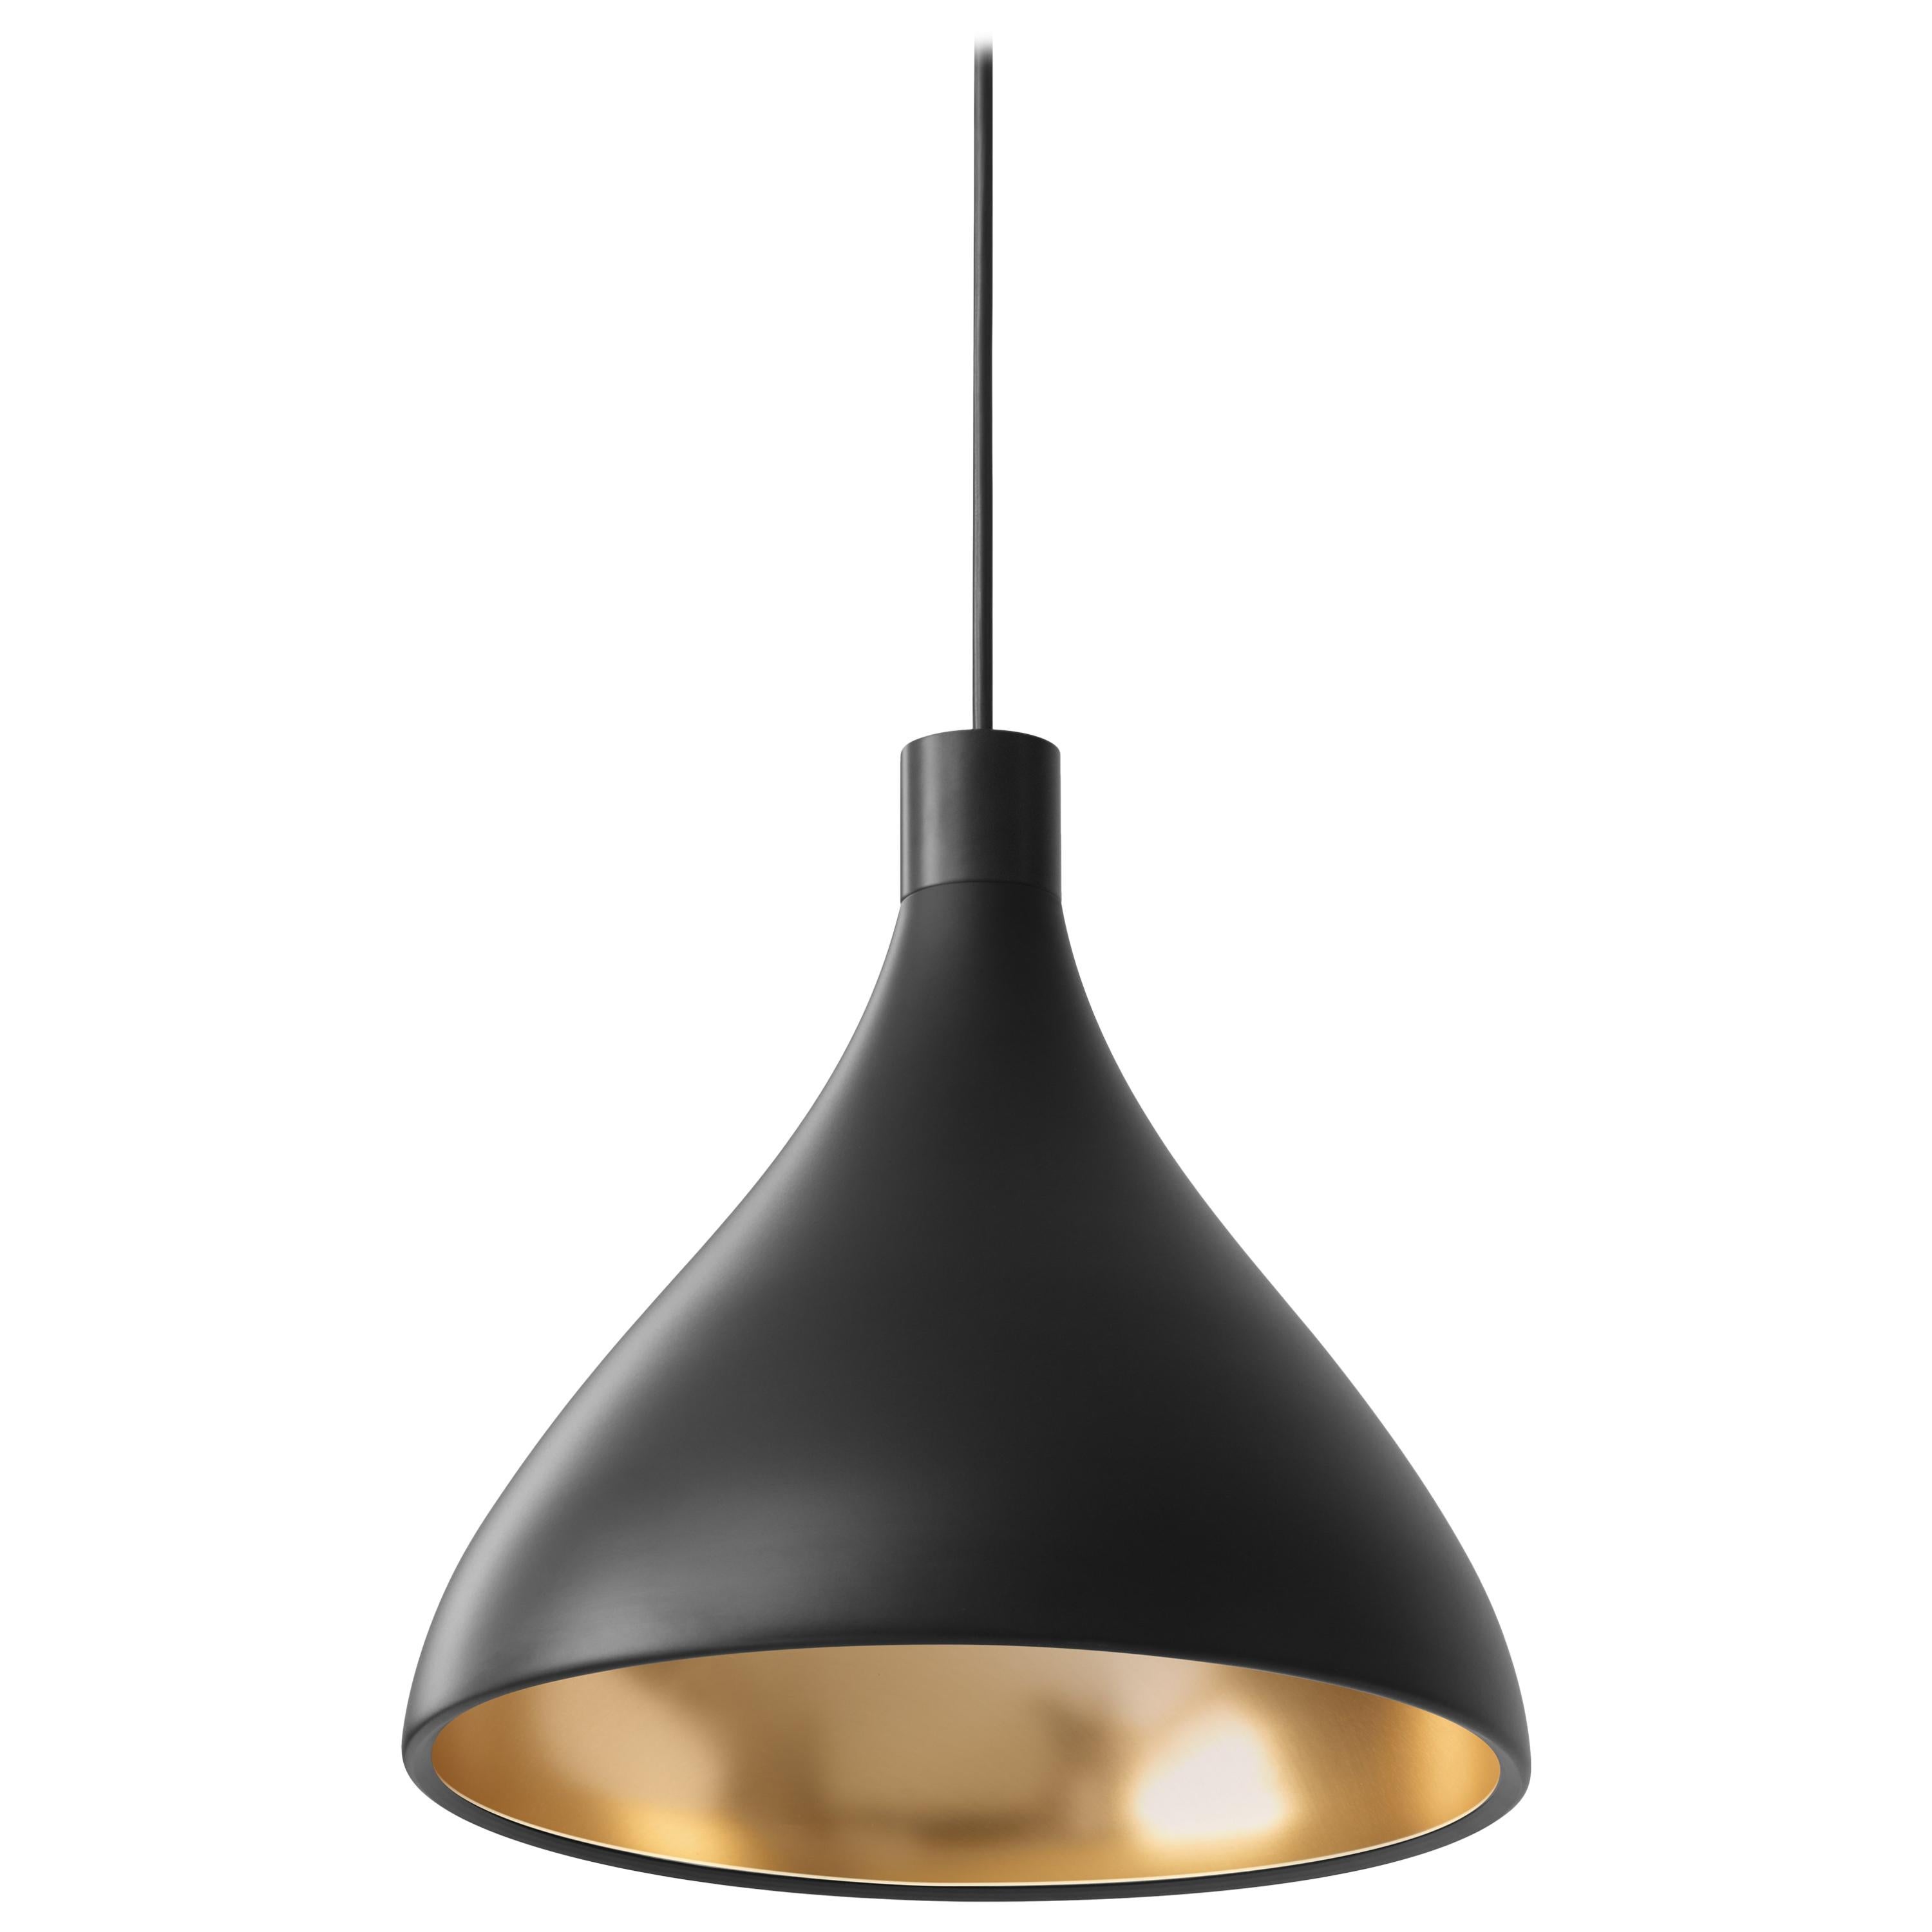 Medium Swell Pendant Light in Black and Brass by Pablo Designs